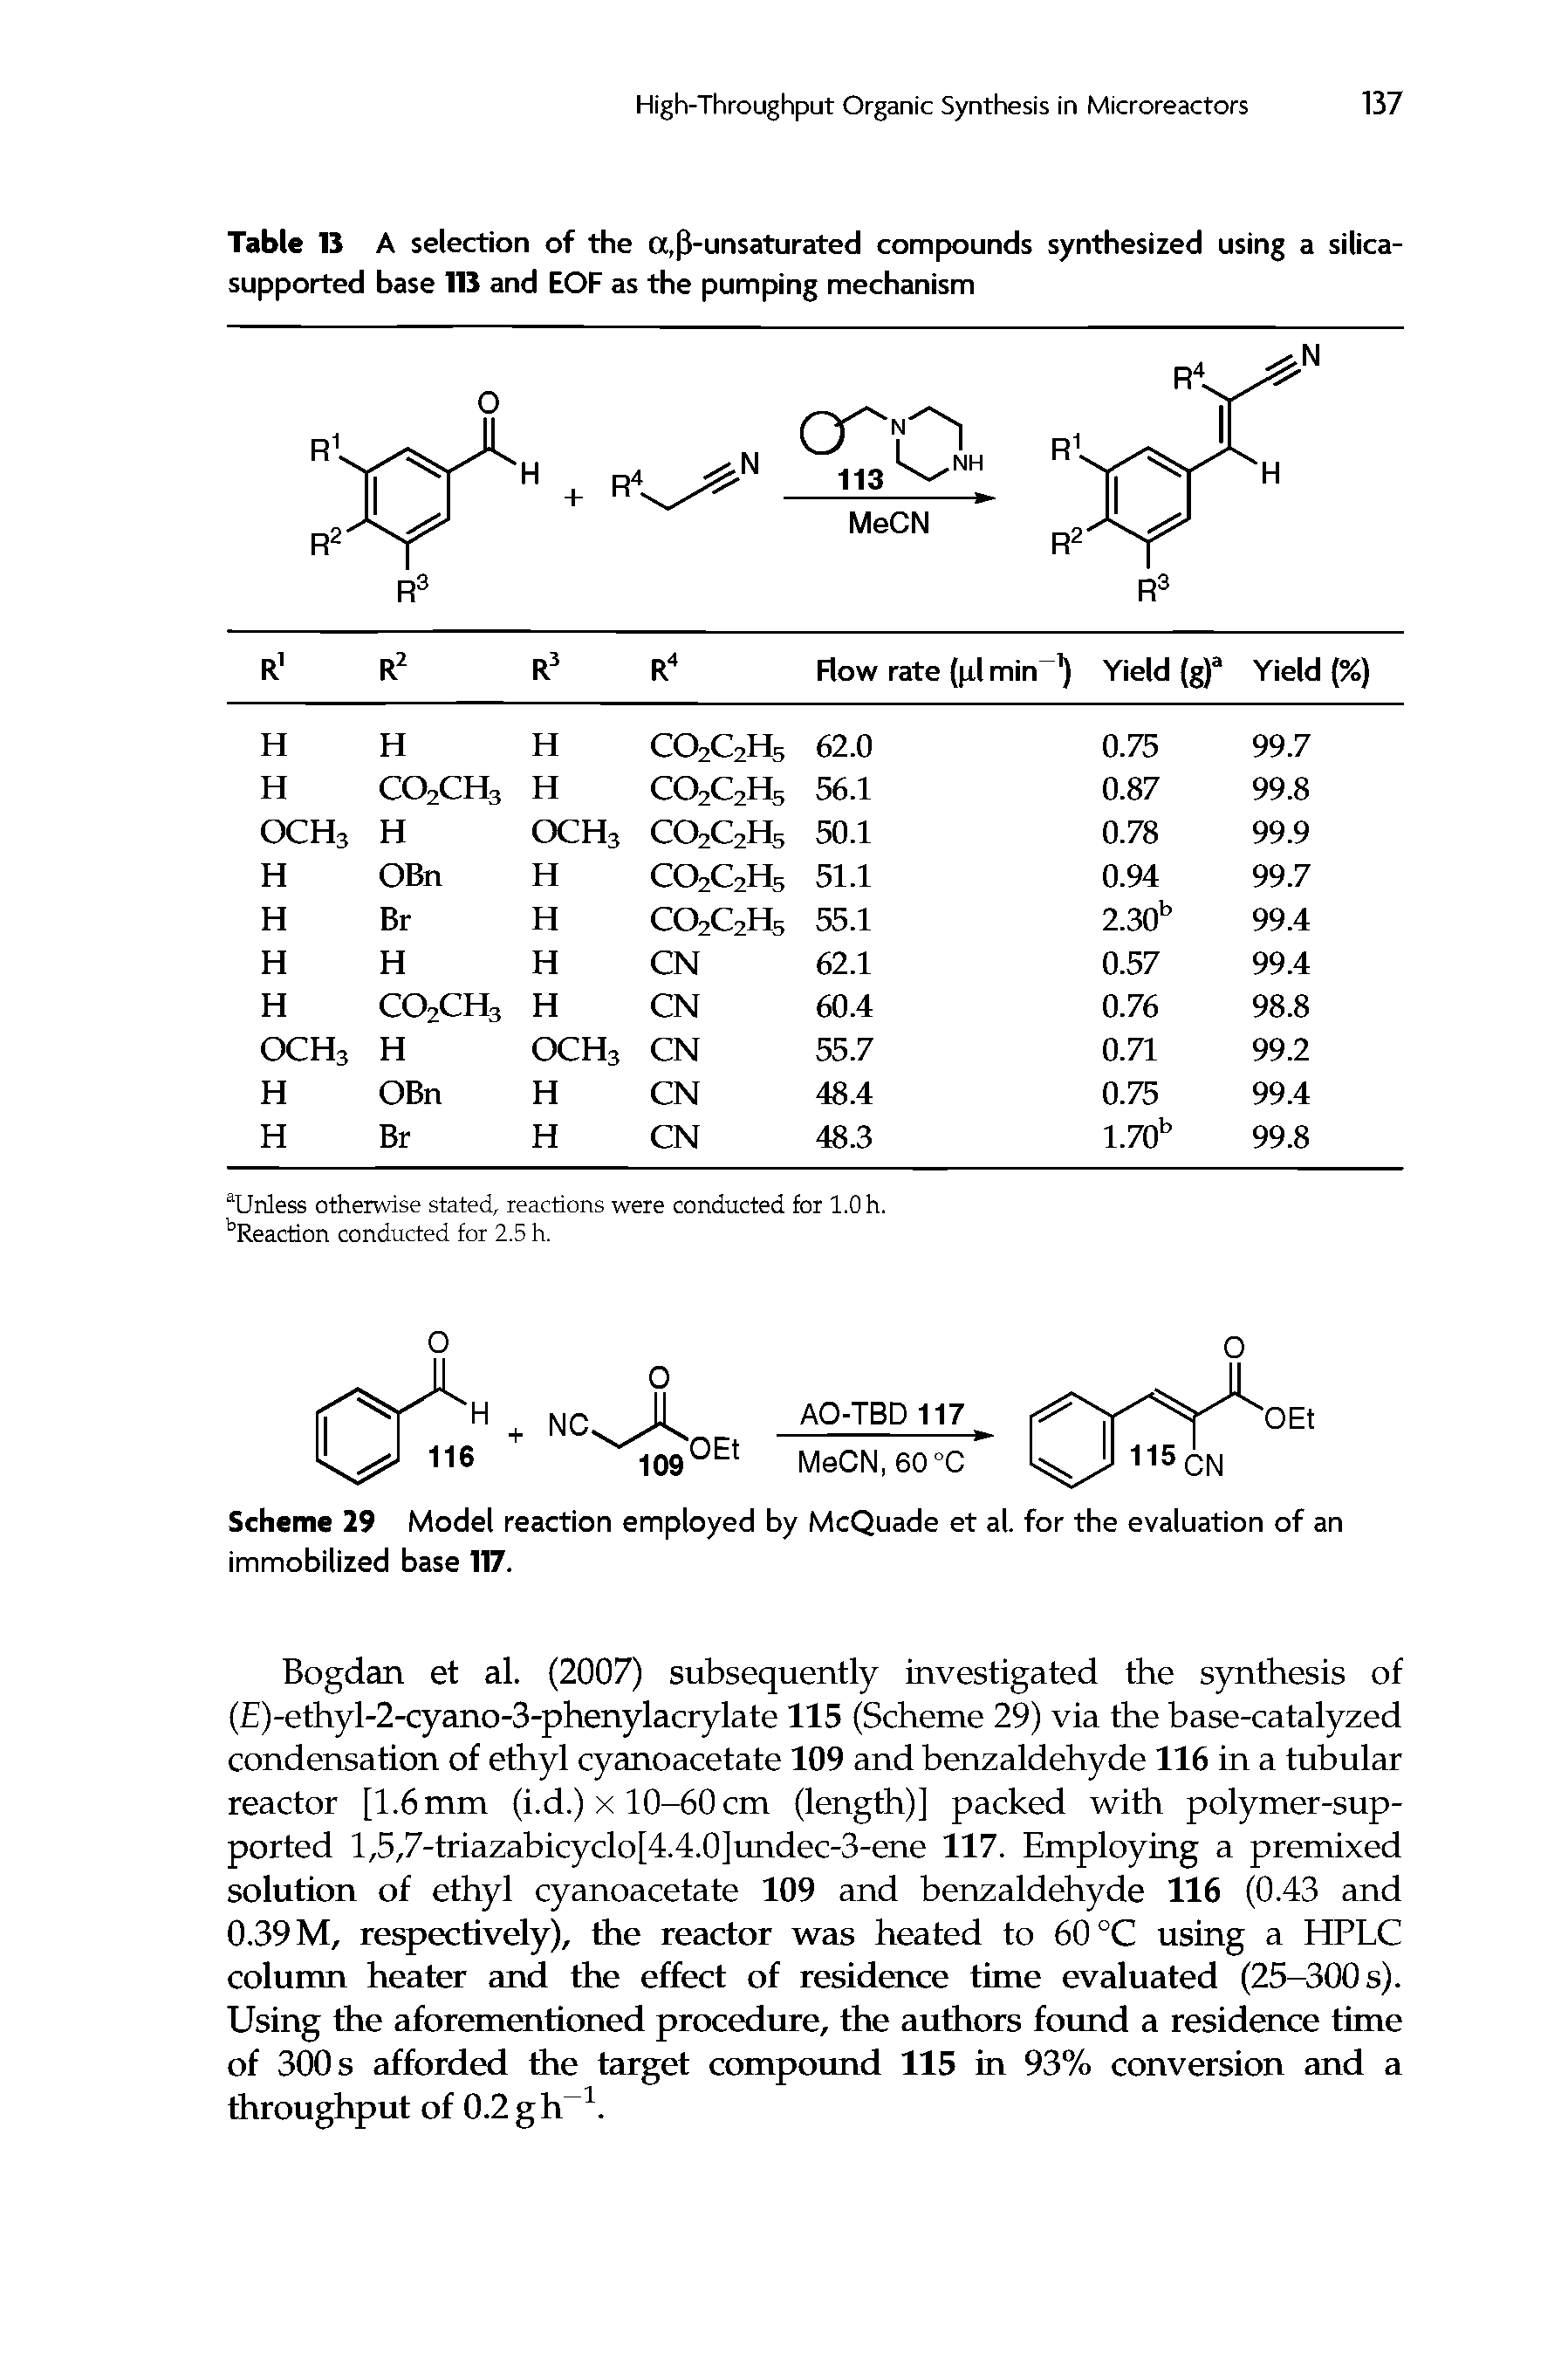 Table 13 A selection of the a, 3-unsaturated compounds synthesized using a silica-supported base 113 and EOF as the pumping mechanism...